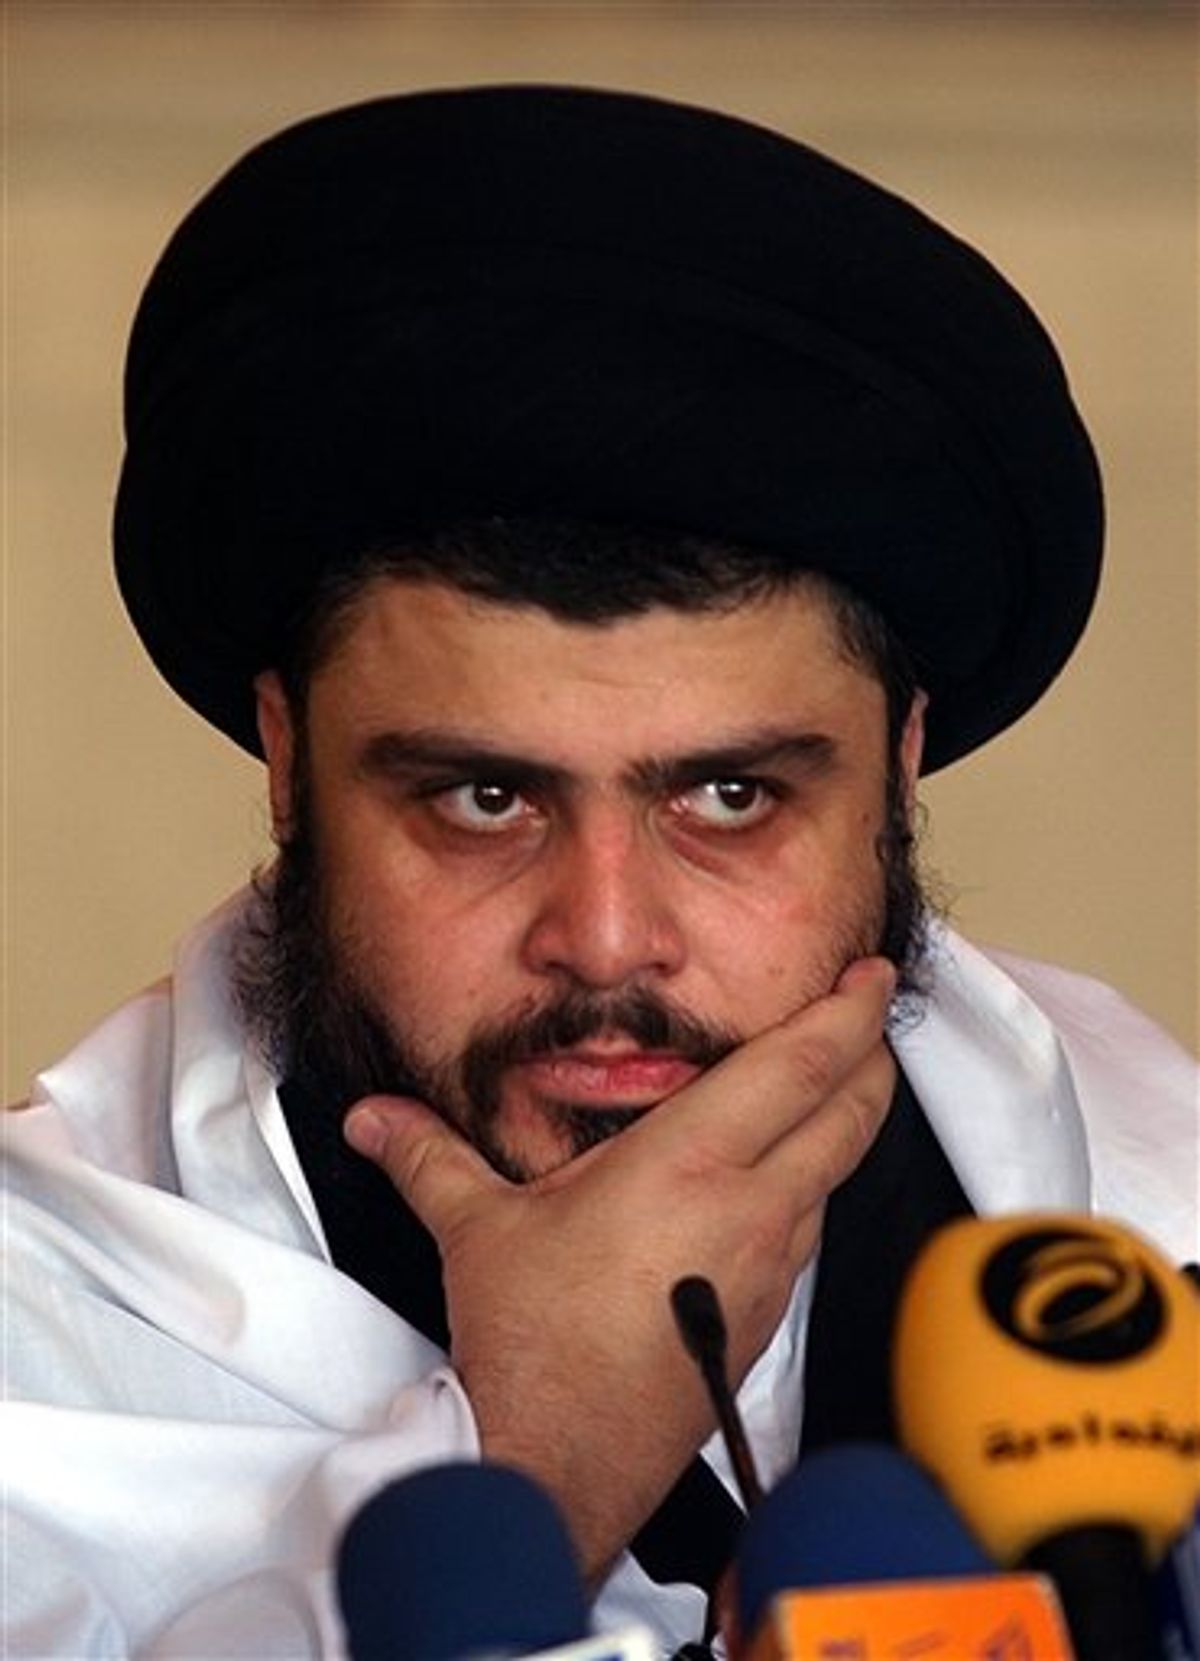 FILE - In this Sept. 22, 2006 file photo, Radical Shiite cleric Muqtada al-Sadr delivers a Friday sermon, in a Mosque, in Kufa, Iraq. Iraqi officials said Wednesday Jan. 5, 2011  al-Sadr returned to Iraq after a nearly 3-year absence.(AP Photo/Alaa Al-Marjani, File) (AP)